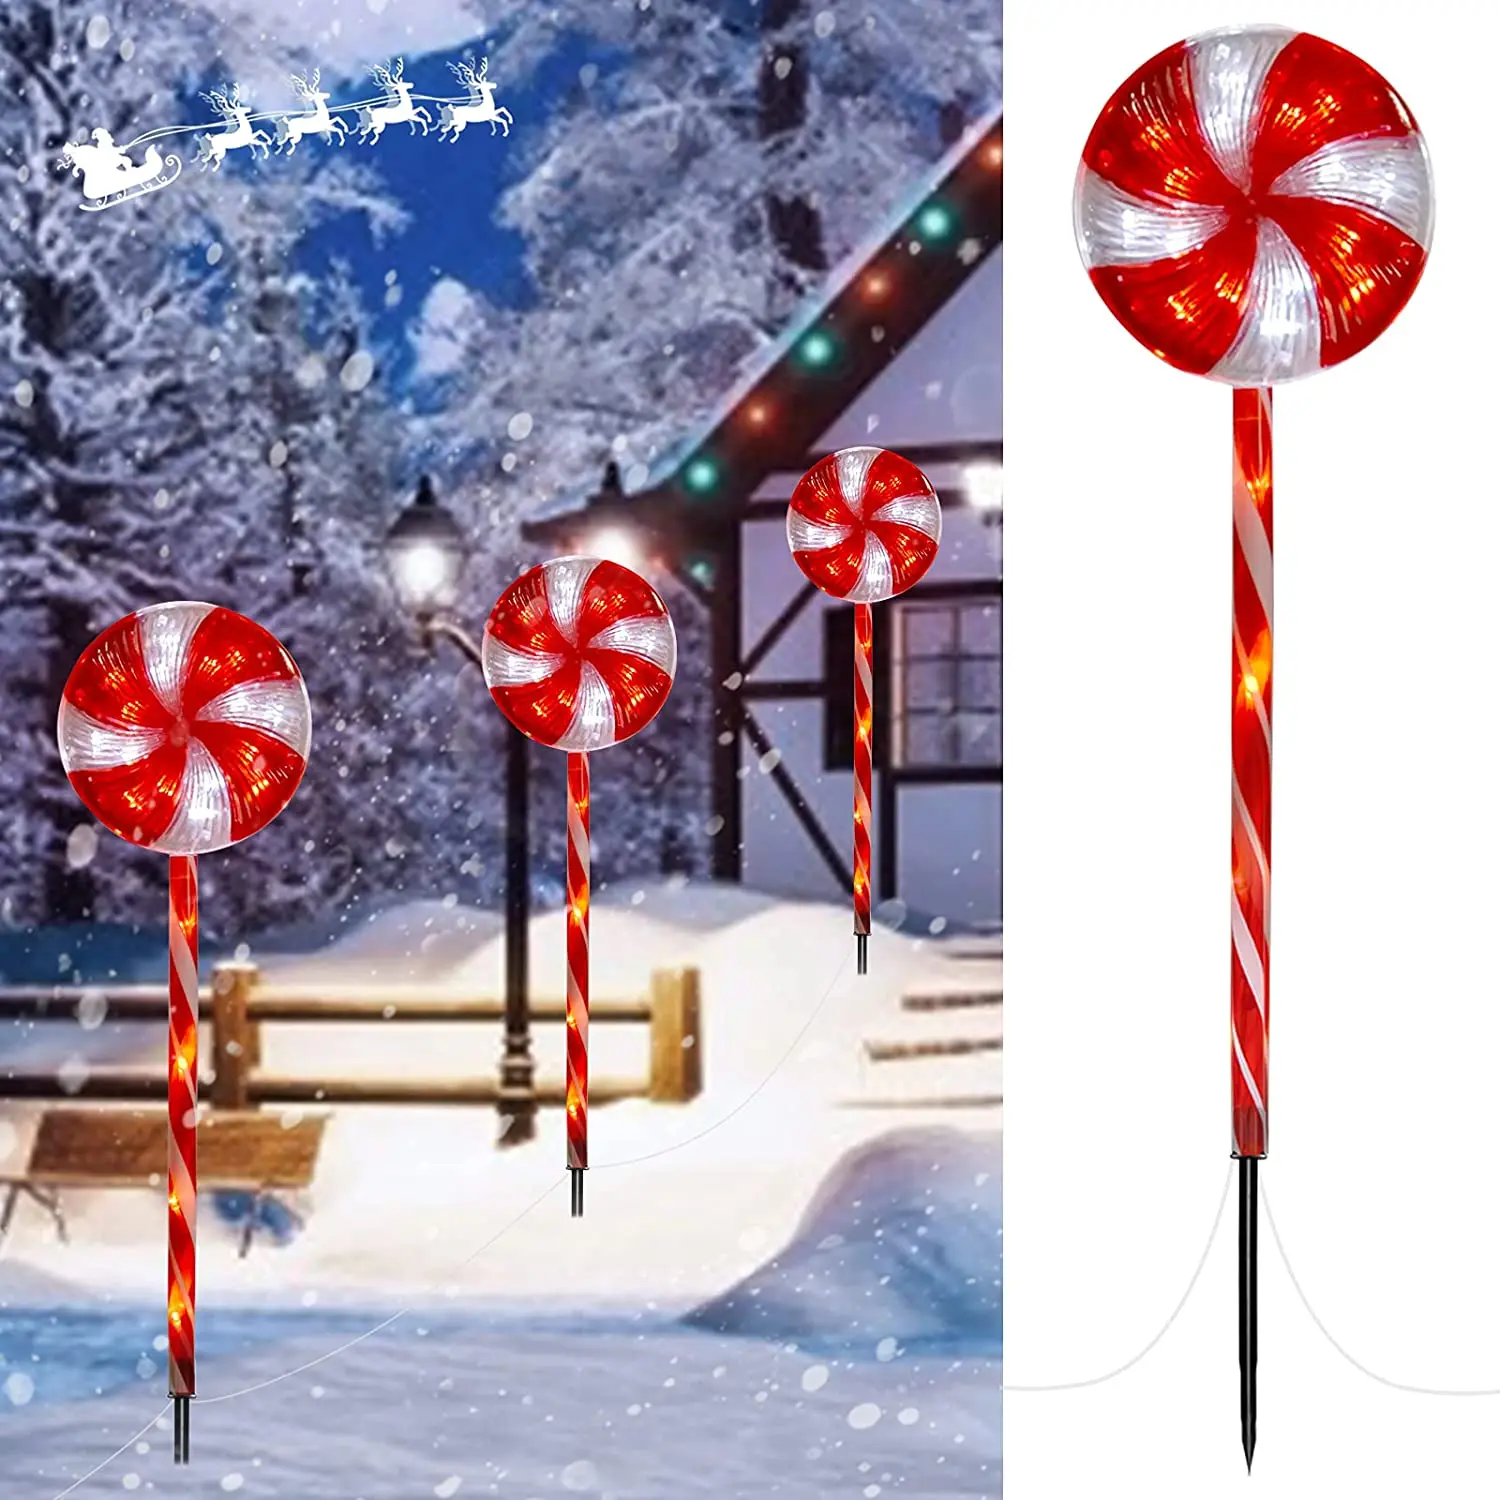 Solar Lollipop Christmas Pathway Lights Outdoor Waterproof Candy Cane Decorations with 8 Lighting Modes String Lamp for Holiday